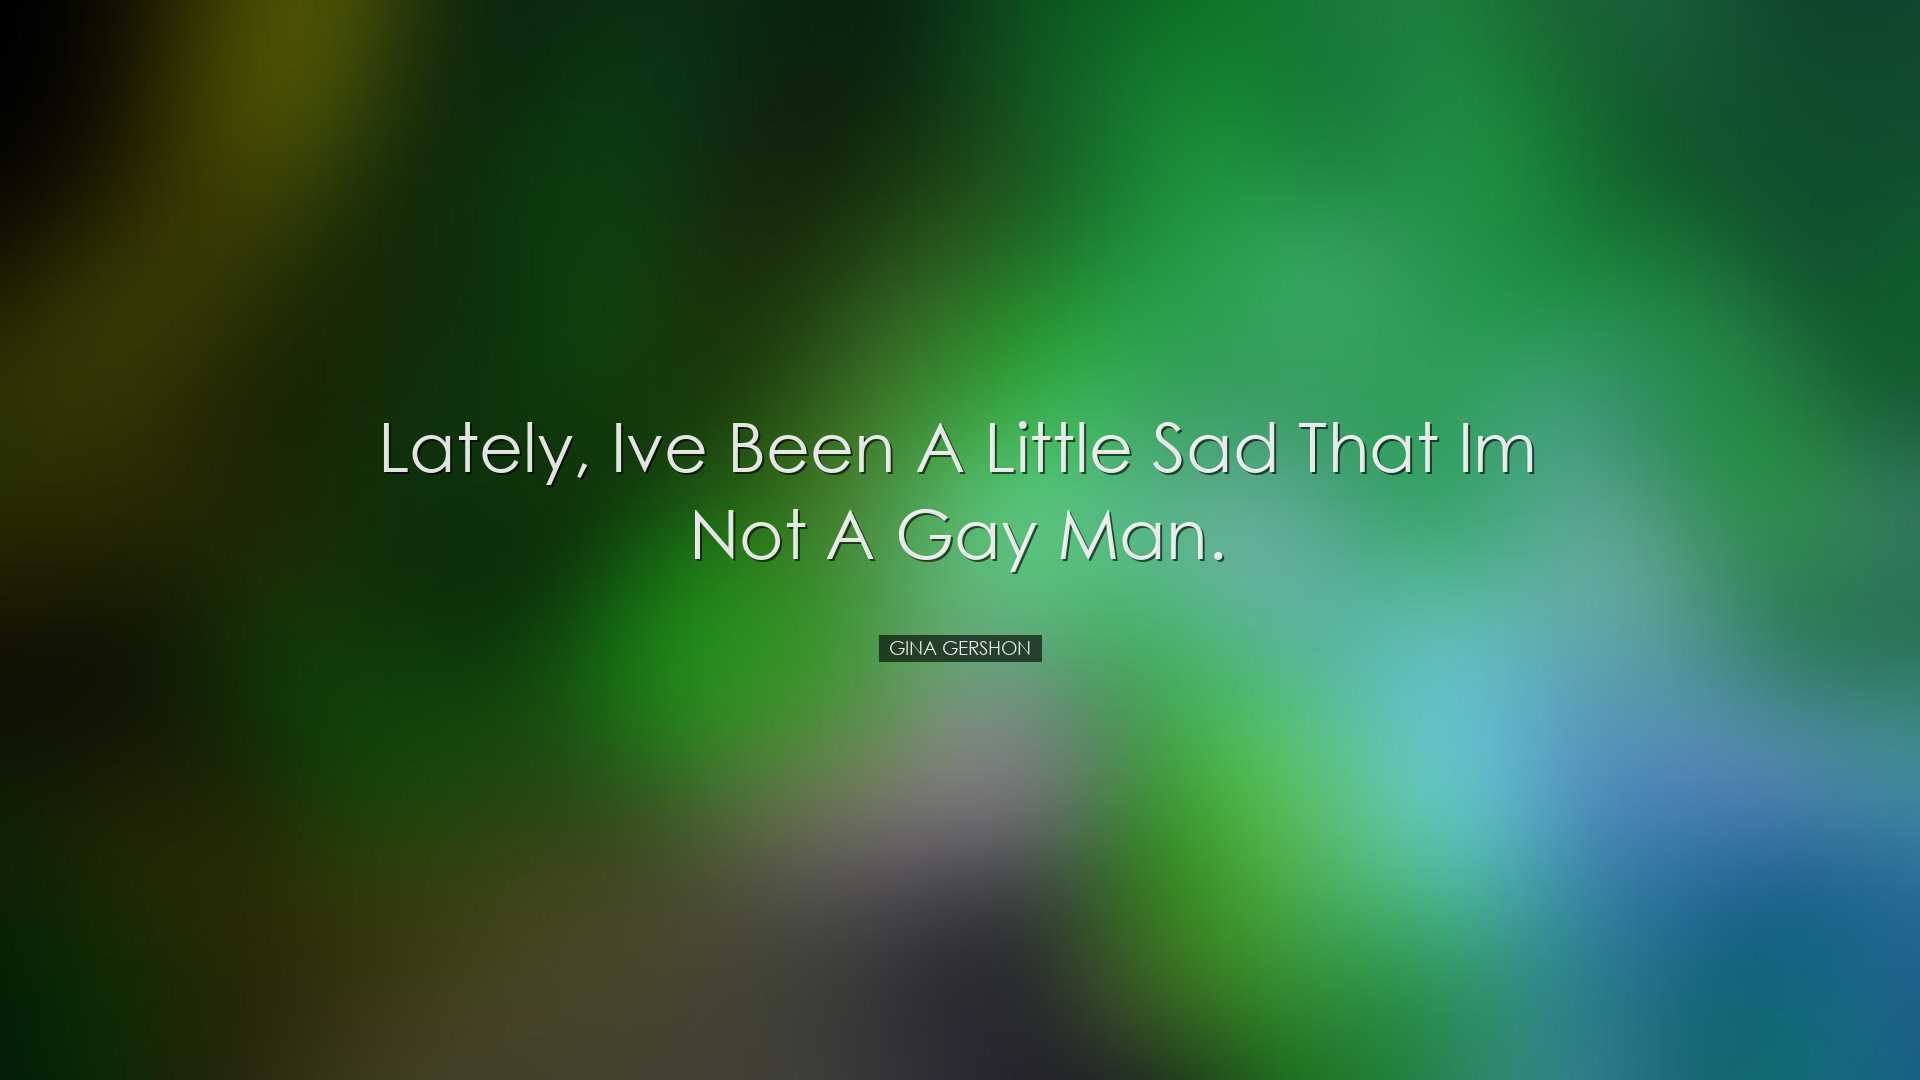 Lately, Ive been a little sad that Im not a gay man. - Gina Gersho